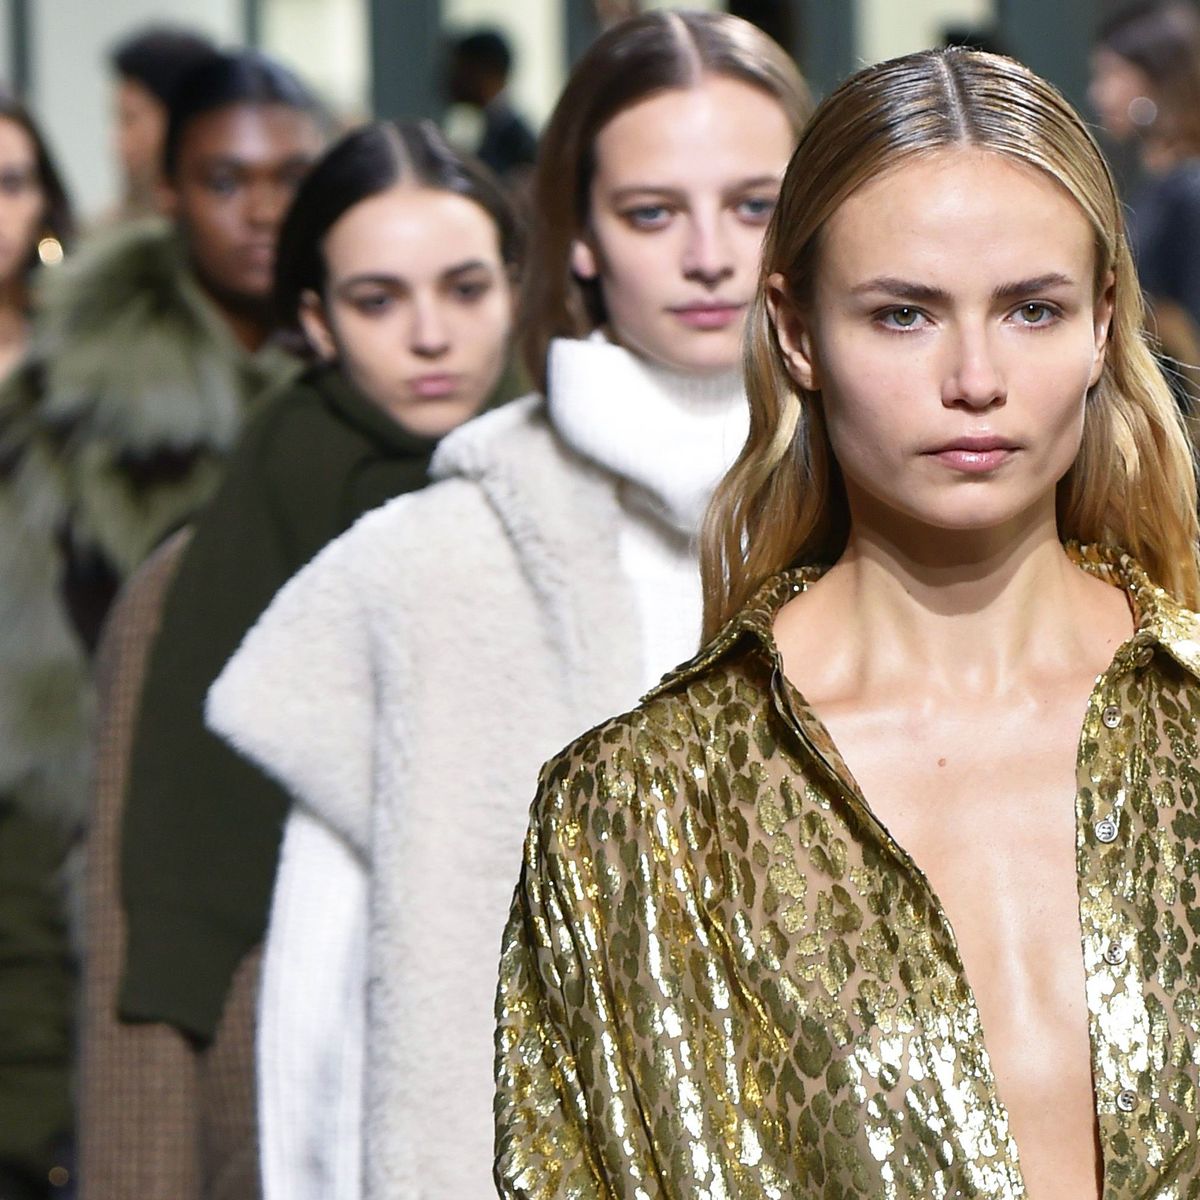 How to Stream Michael Kors' Fall 2019 Runway Show | Marie Claire